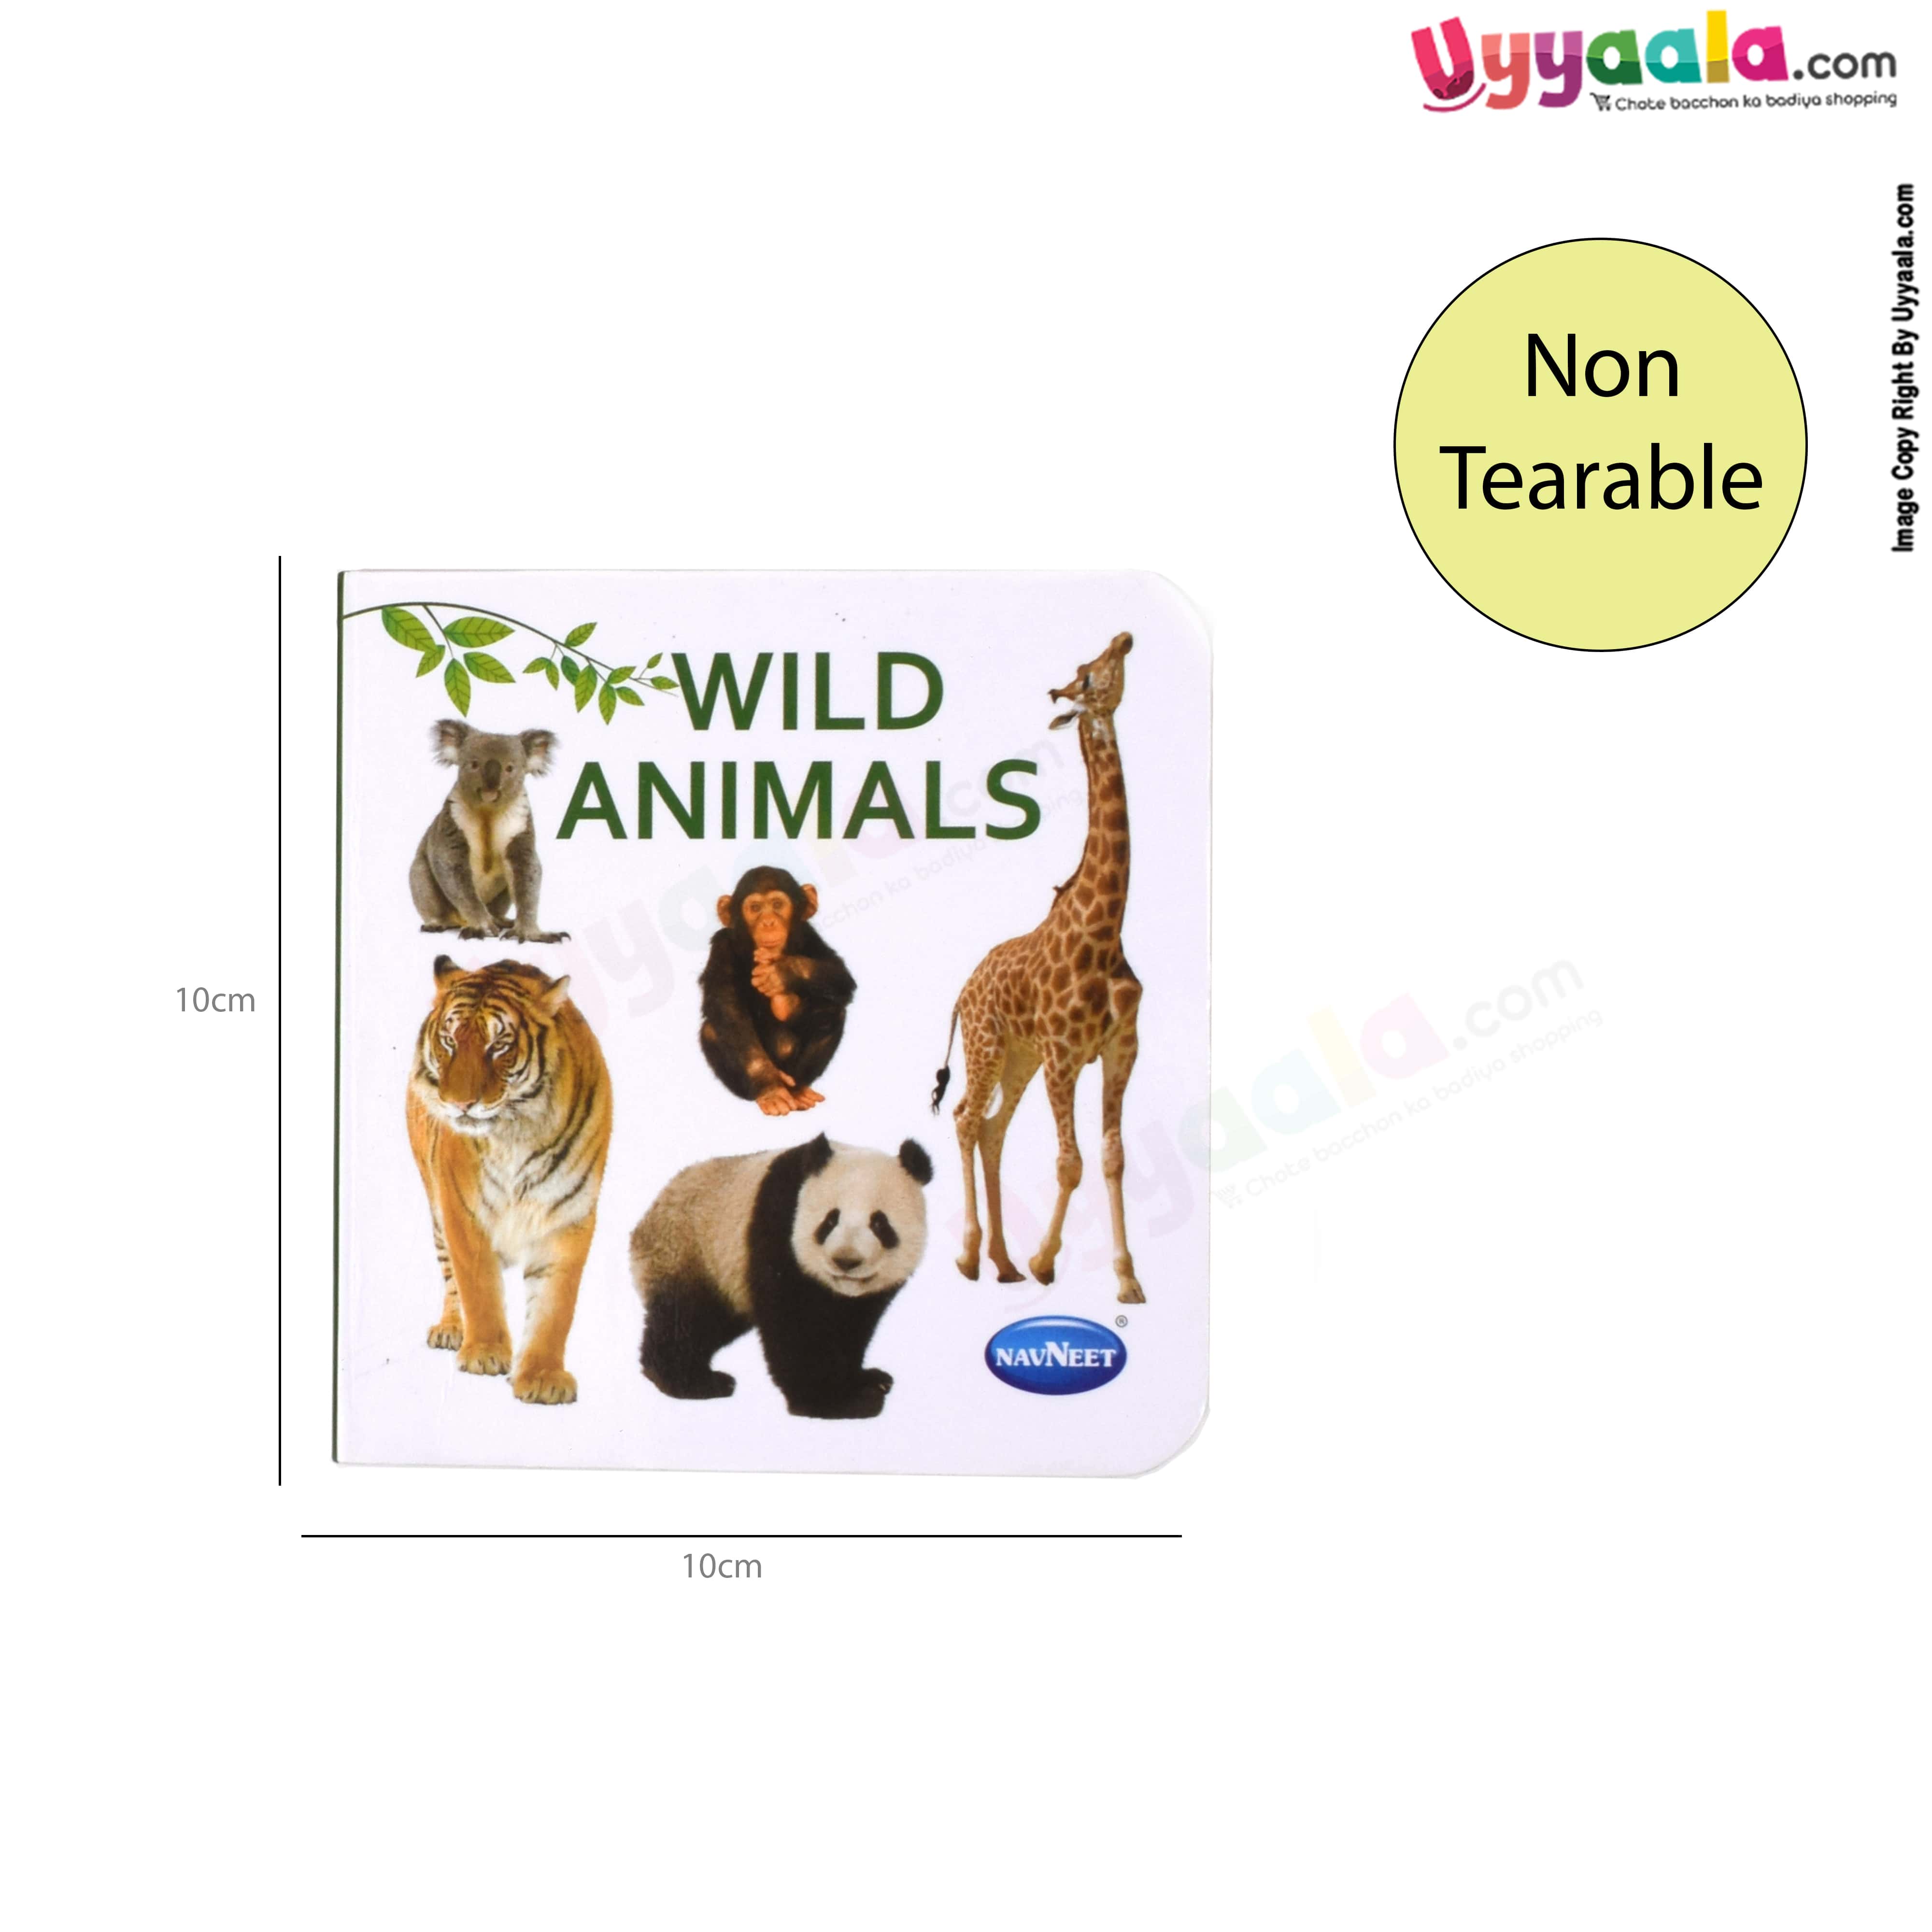 Vegetables, wild animals & shapes & colors books for children's